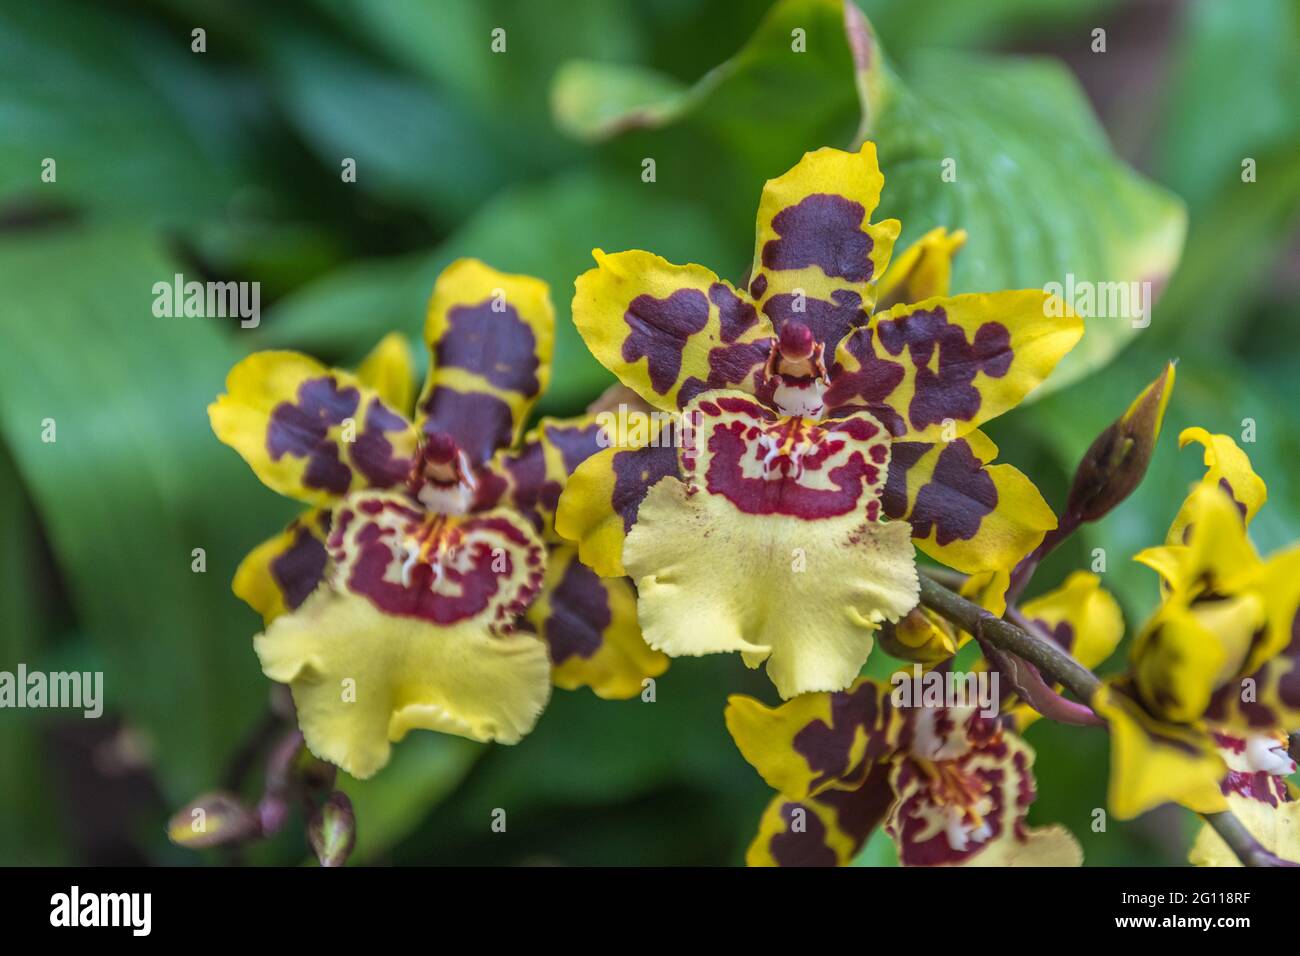 Dancing-lady orchid or Oncidium orchid or golden shower orchid in Trauttmansdorff botanical garden in Merano, Trentino Alto Adige Südtirol, Italy, Eur Stock Photo